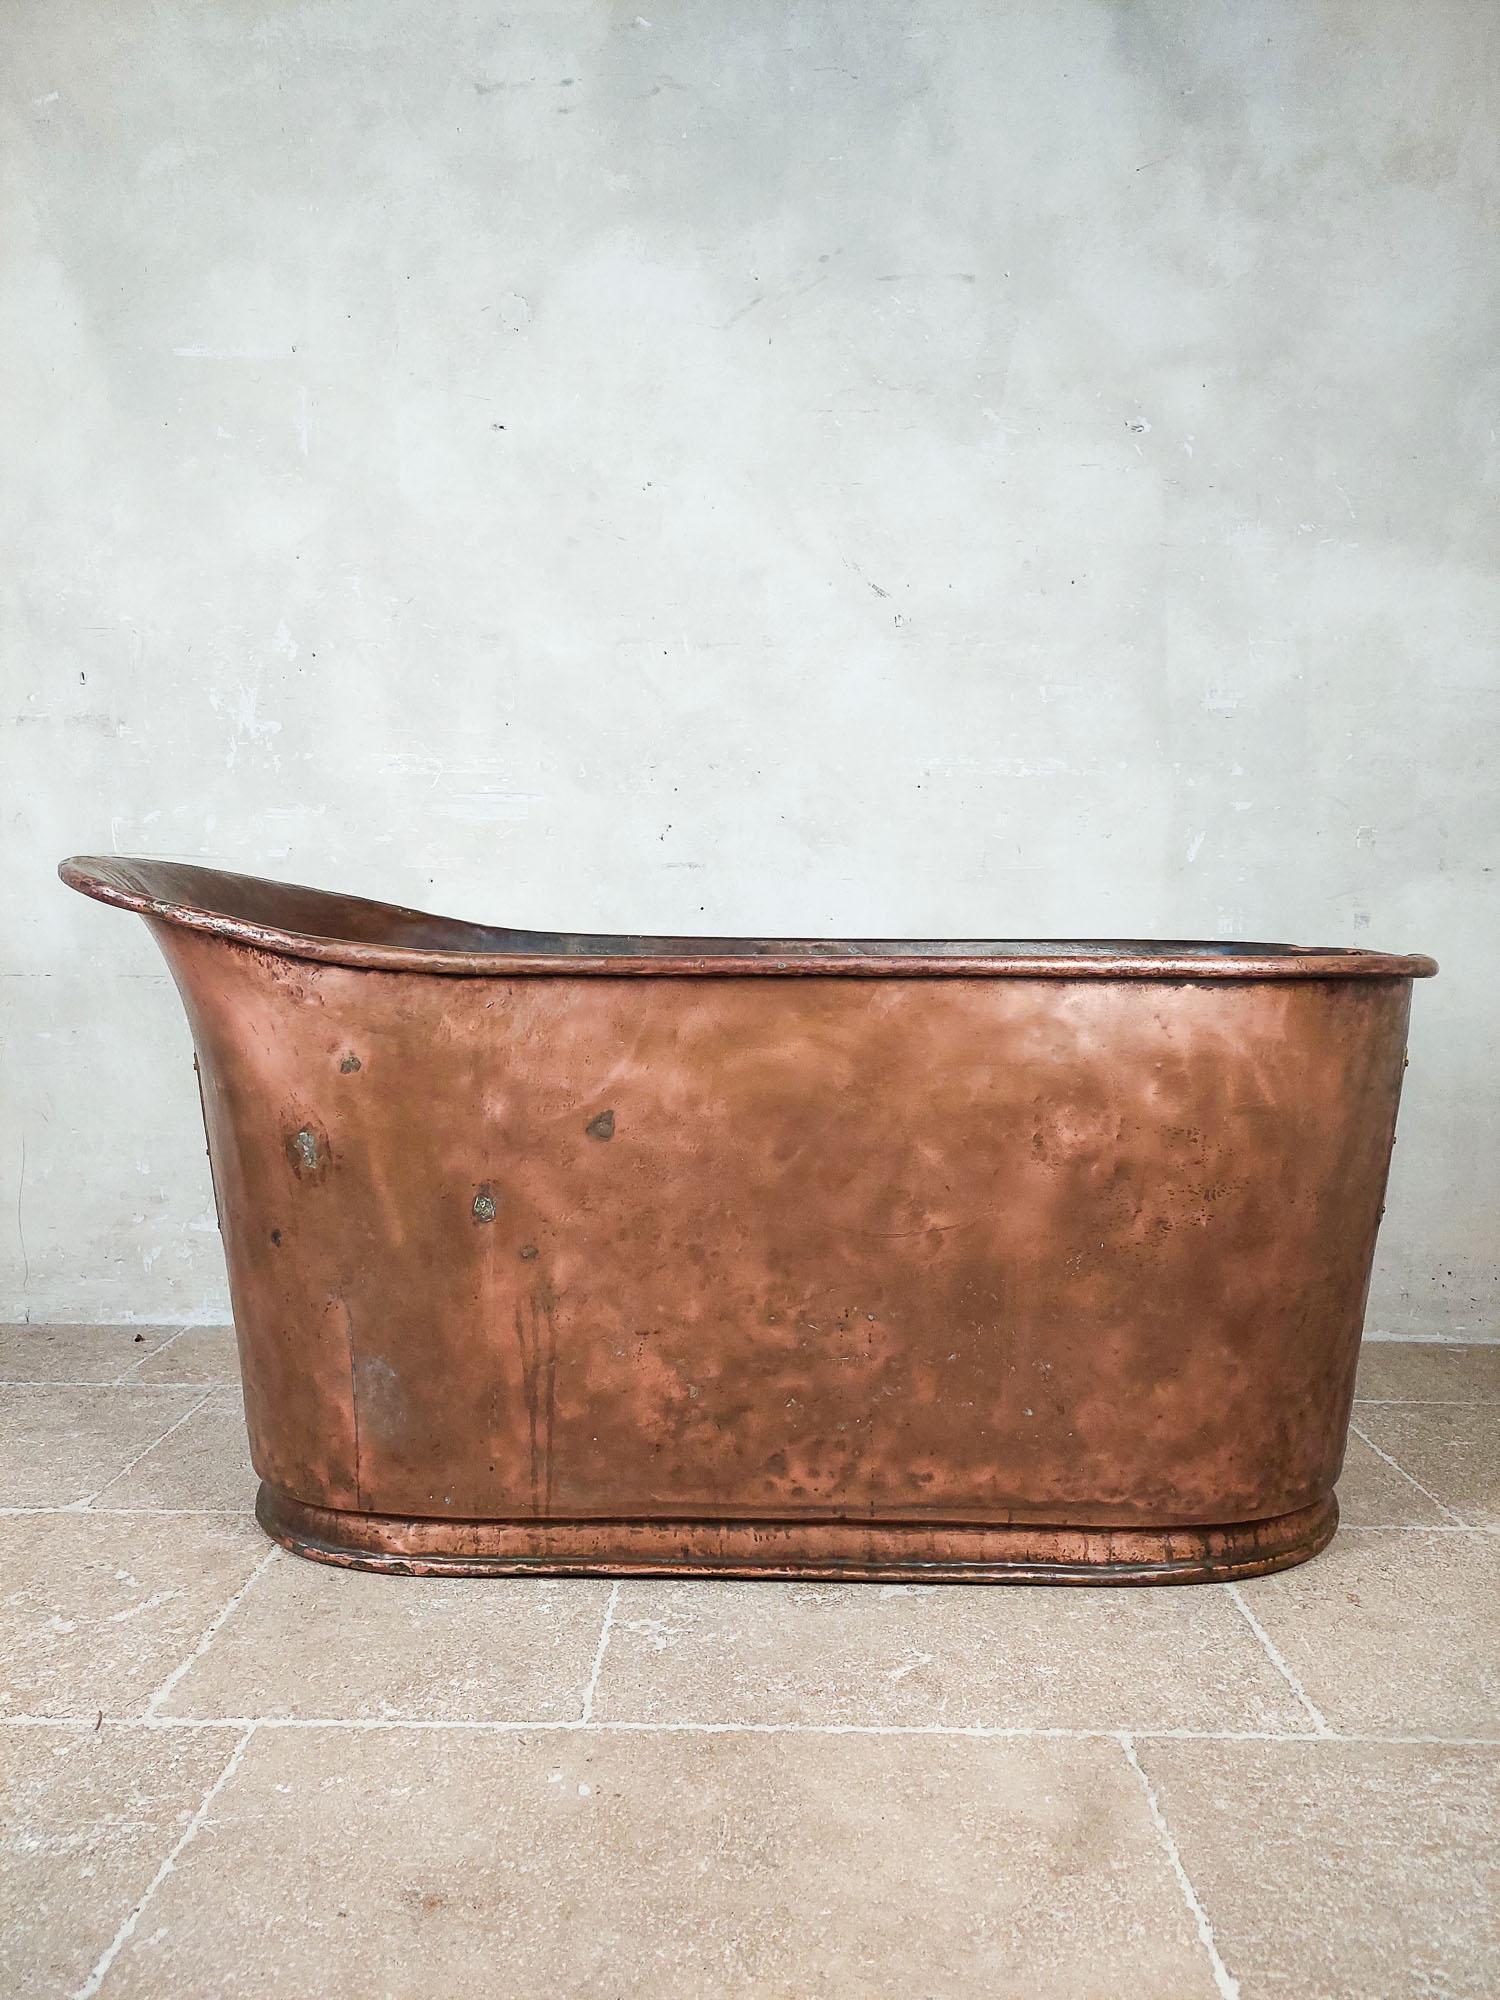 Beautiful early 19th century (around 1800) copper bathtub. Made in France in the Empire style. This is an Asymmetrical bathtub that you use while sitting, which is why this bathtub is quite high.

length 149 cm x width 65.5 cm x height 62-73 cm.